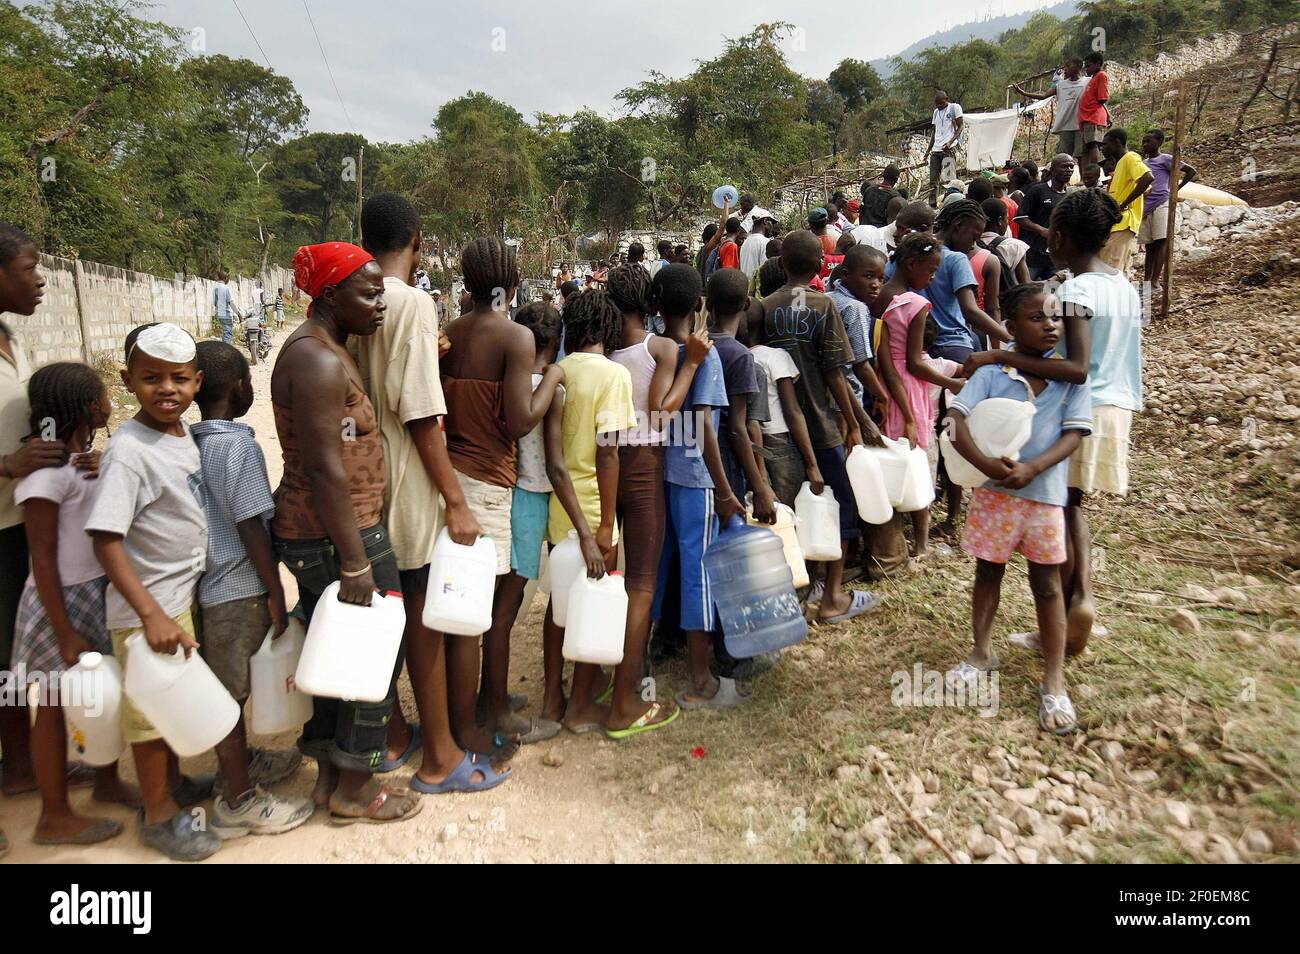 26 January 2010 - Carrefour-Feuilles, Haiti - Haitians queue for water in Tapis Rouge, a neighbourhood in the Carrefour-Feuilles area of Haiti's capital city, Port-au-Prince. Carrefour-Feuilles, a slum that stretches into the high mountains surrounding the city, has received little assistance since Haiti's earthquake. Photo Credit: UN Photo/Sophia Paris/Sipa Press***EDITORIAL USE ONLY***/1001282033 Stock Photo